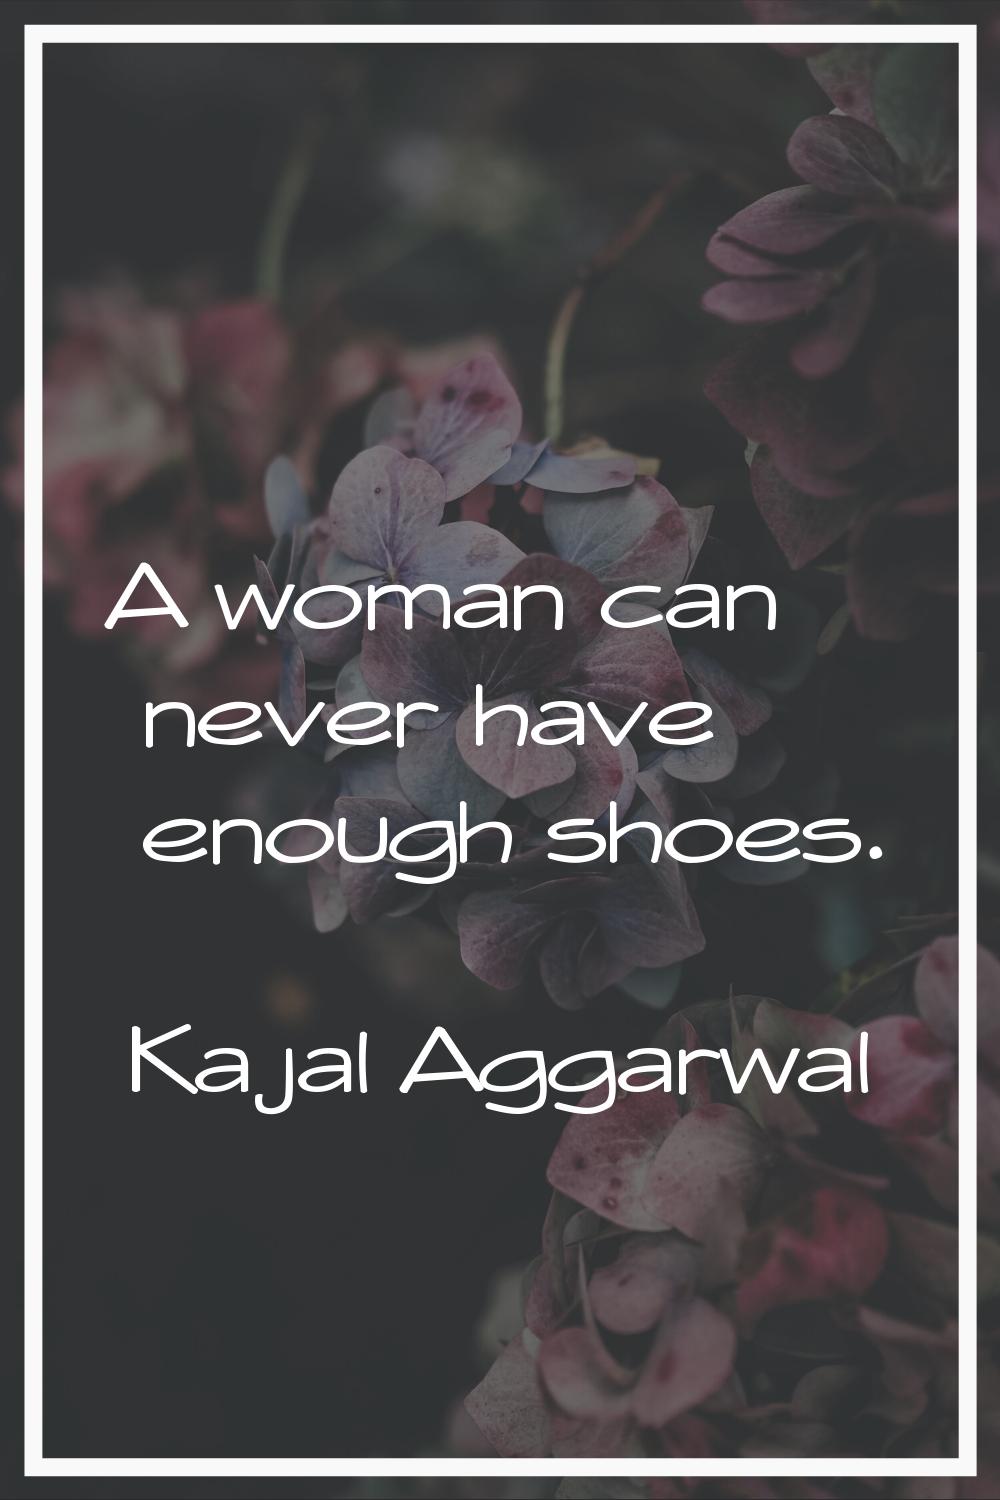 A woman can never have enough shoes.